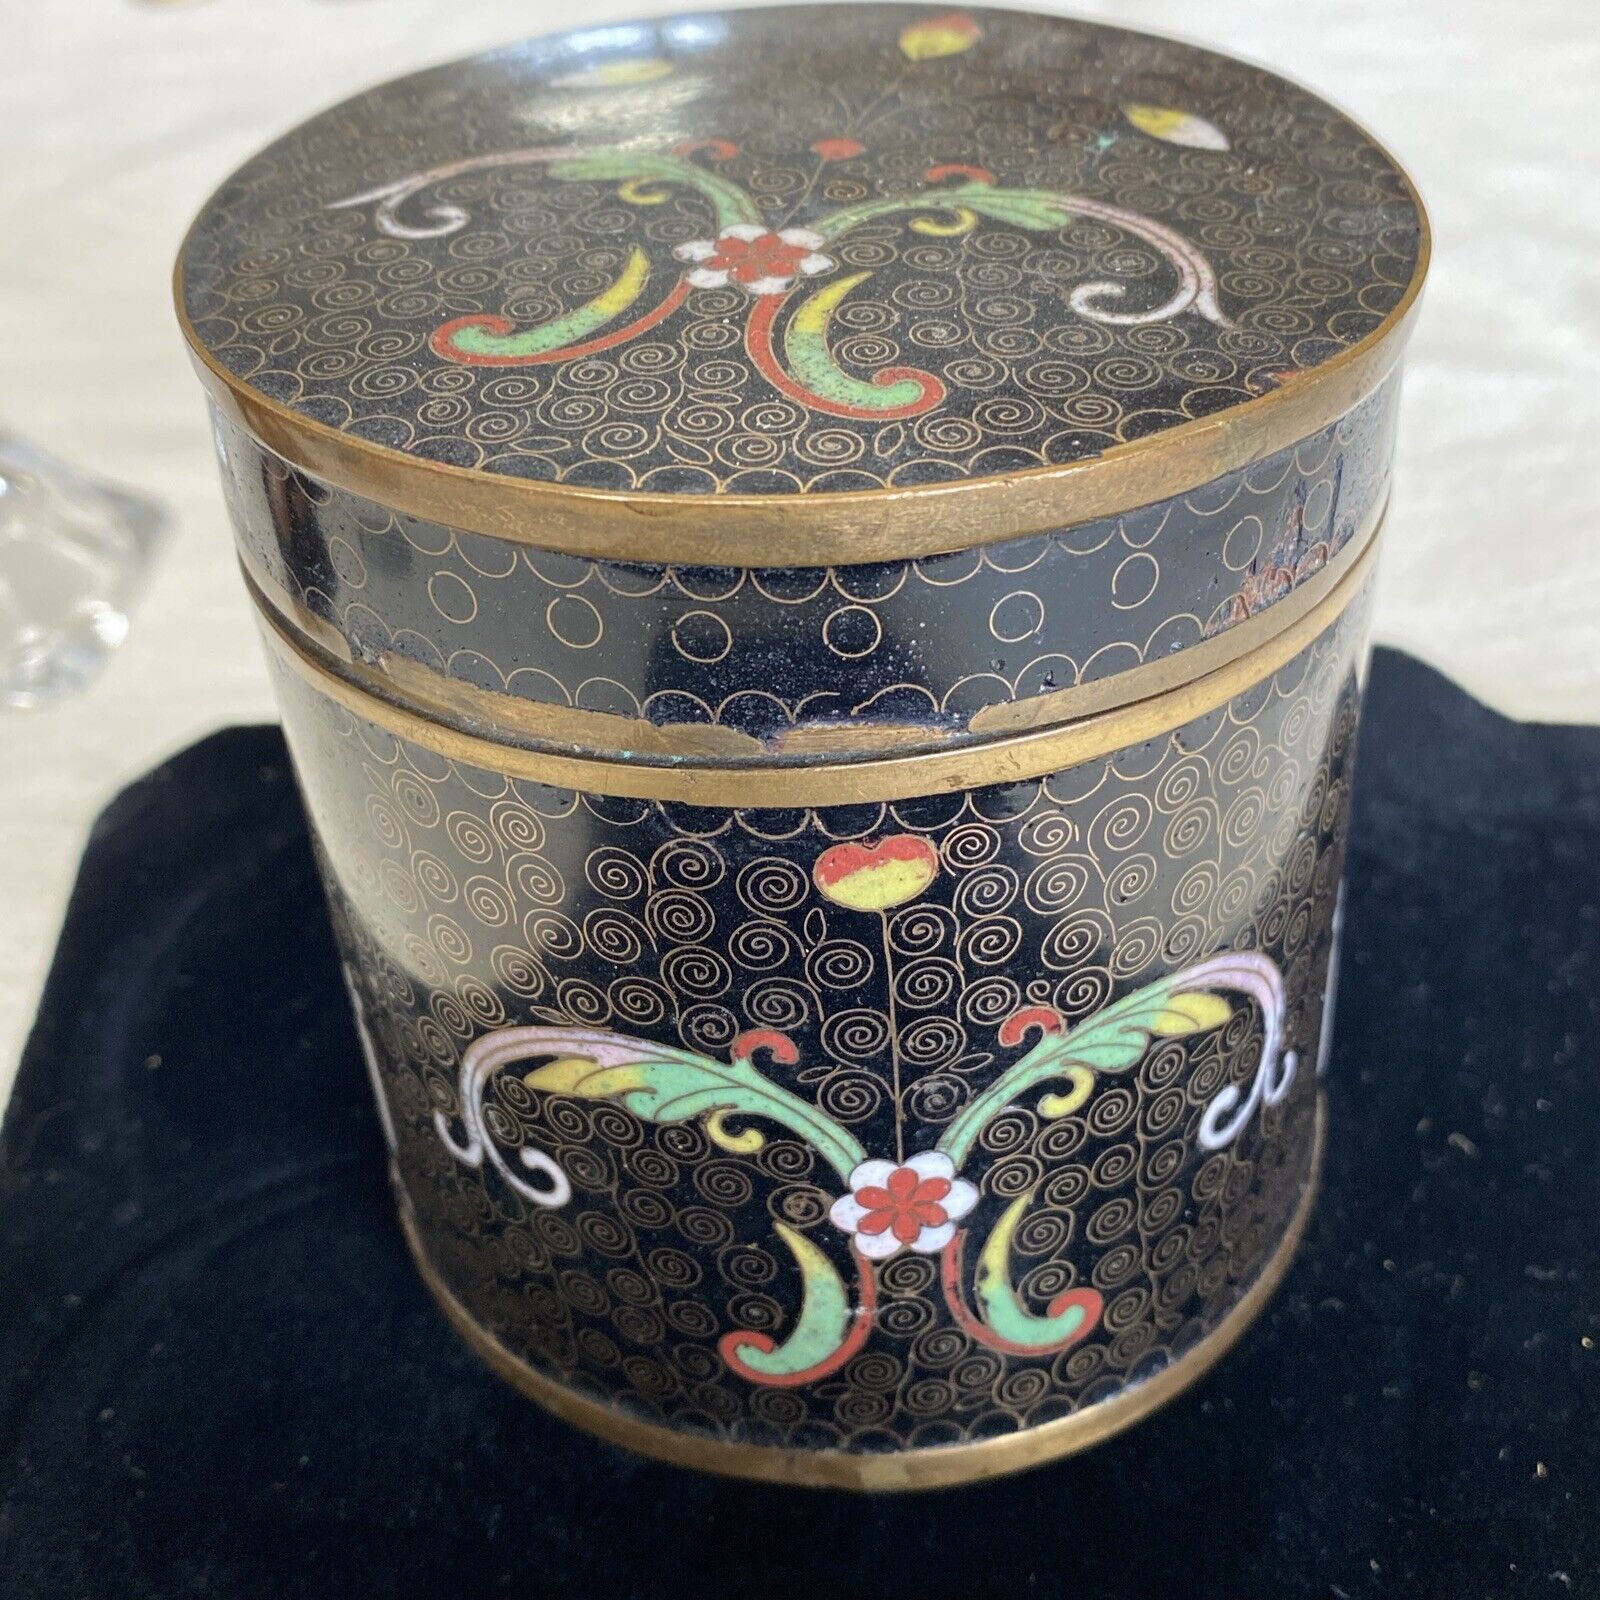 Late 1800’s Chinese Cloisonne Enamel Metal Tea Caddy W Lid Apx 3.5 By 3.5